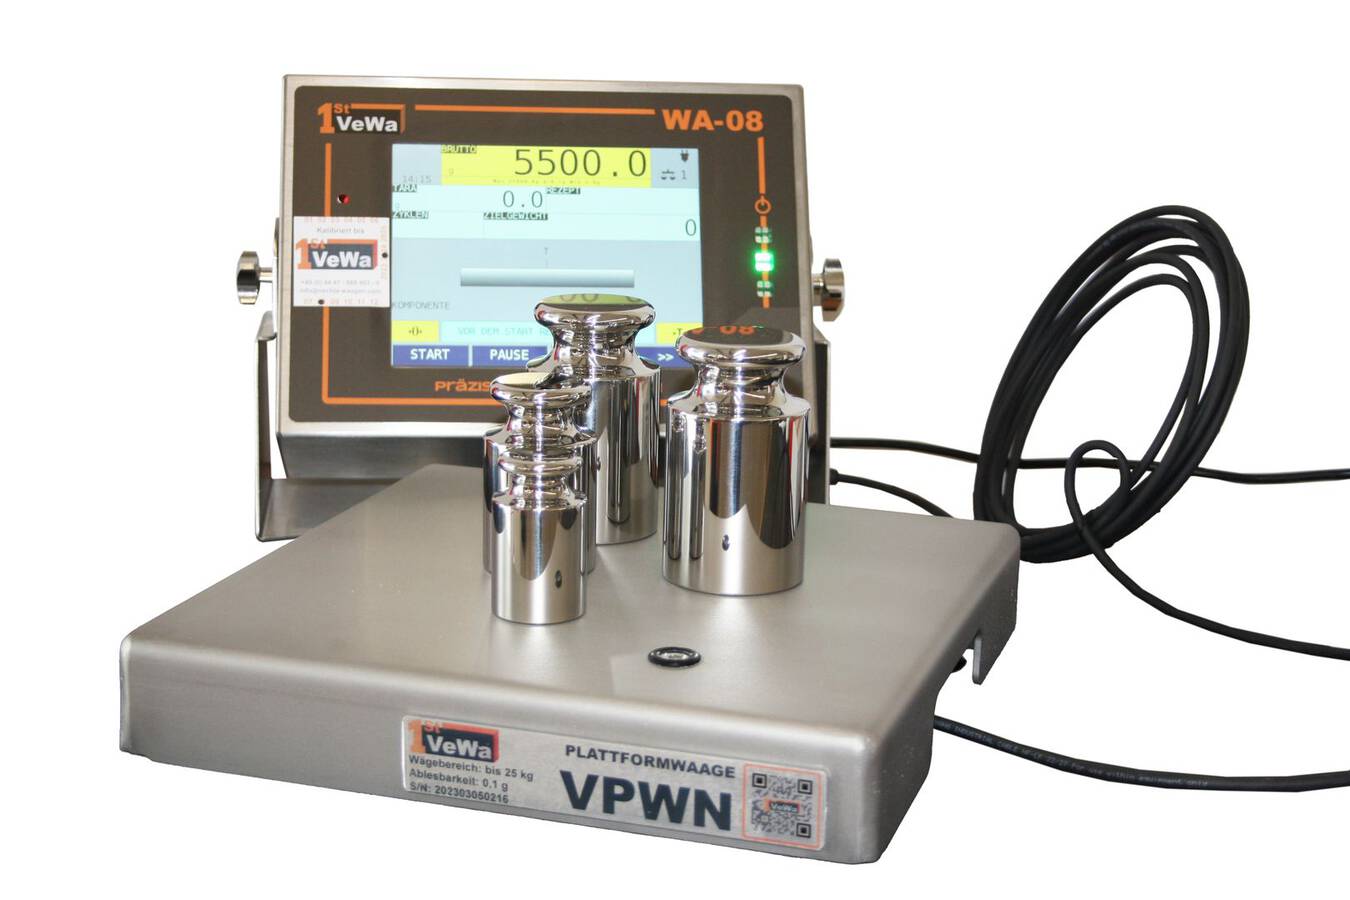 New platform scale VPWN The new VPWN platform scale from VECHTA Waagen GmbH is manufactured in Germany from stainless steel and is particularly suitable for the chemical and pharmaceutical industries.